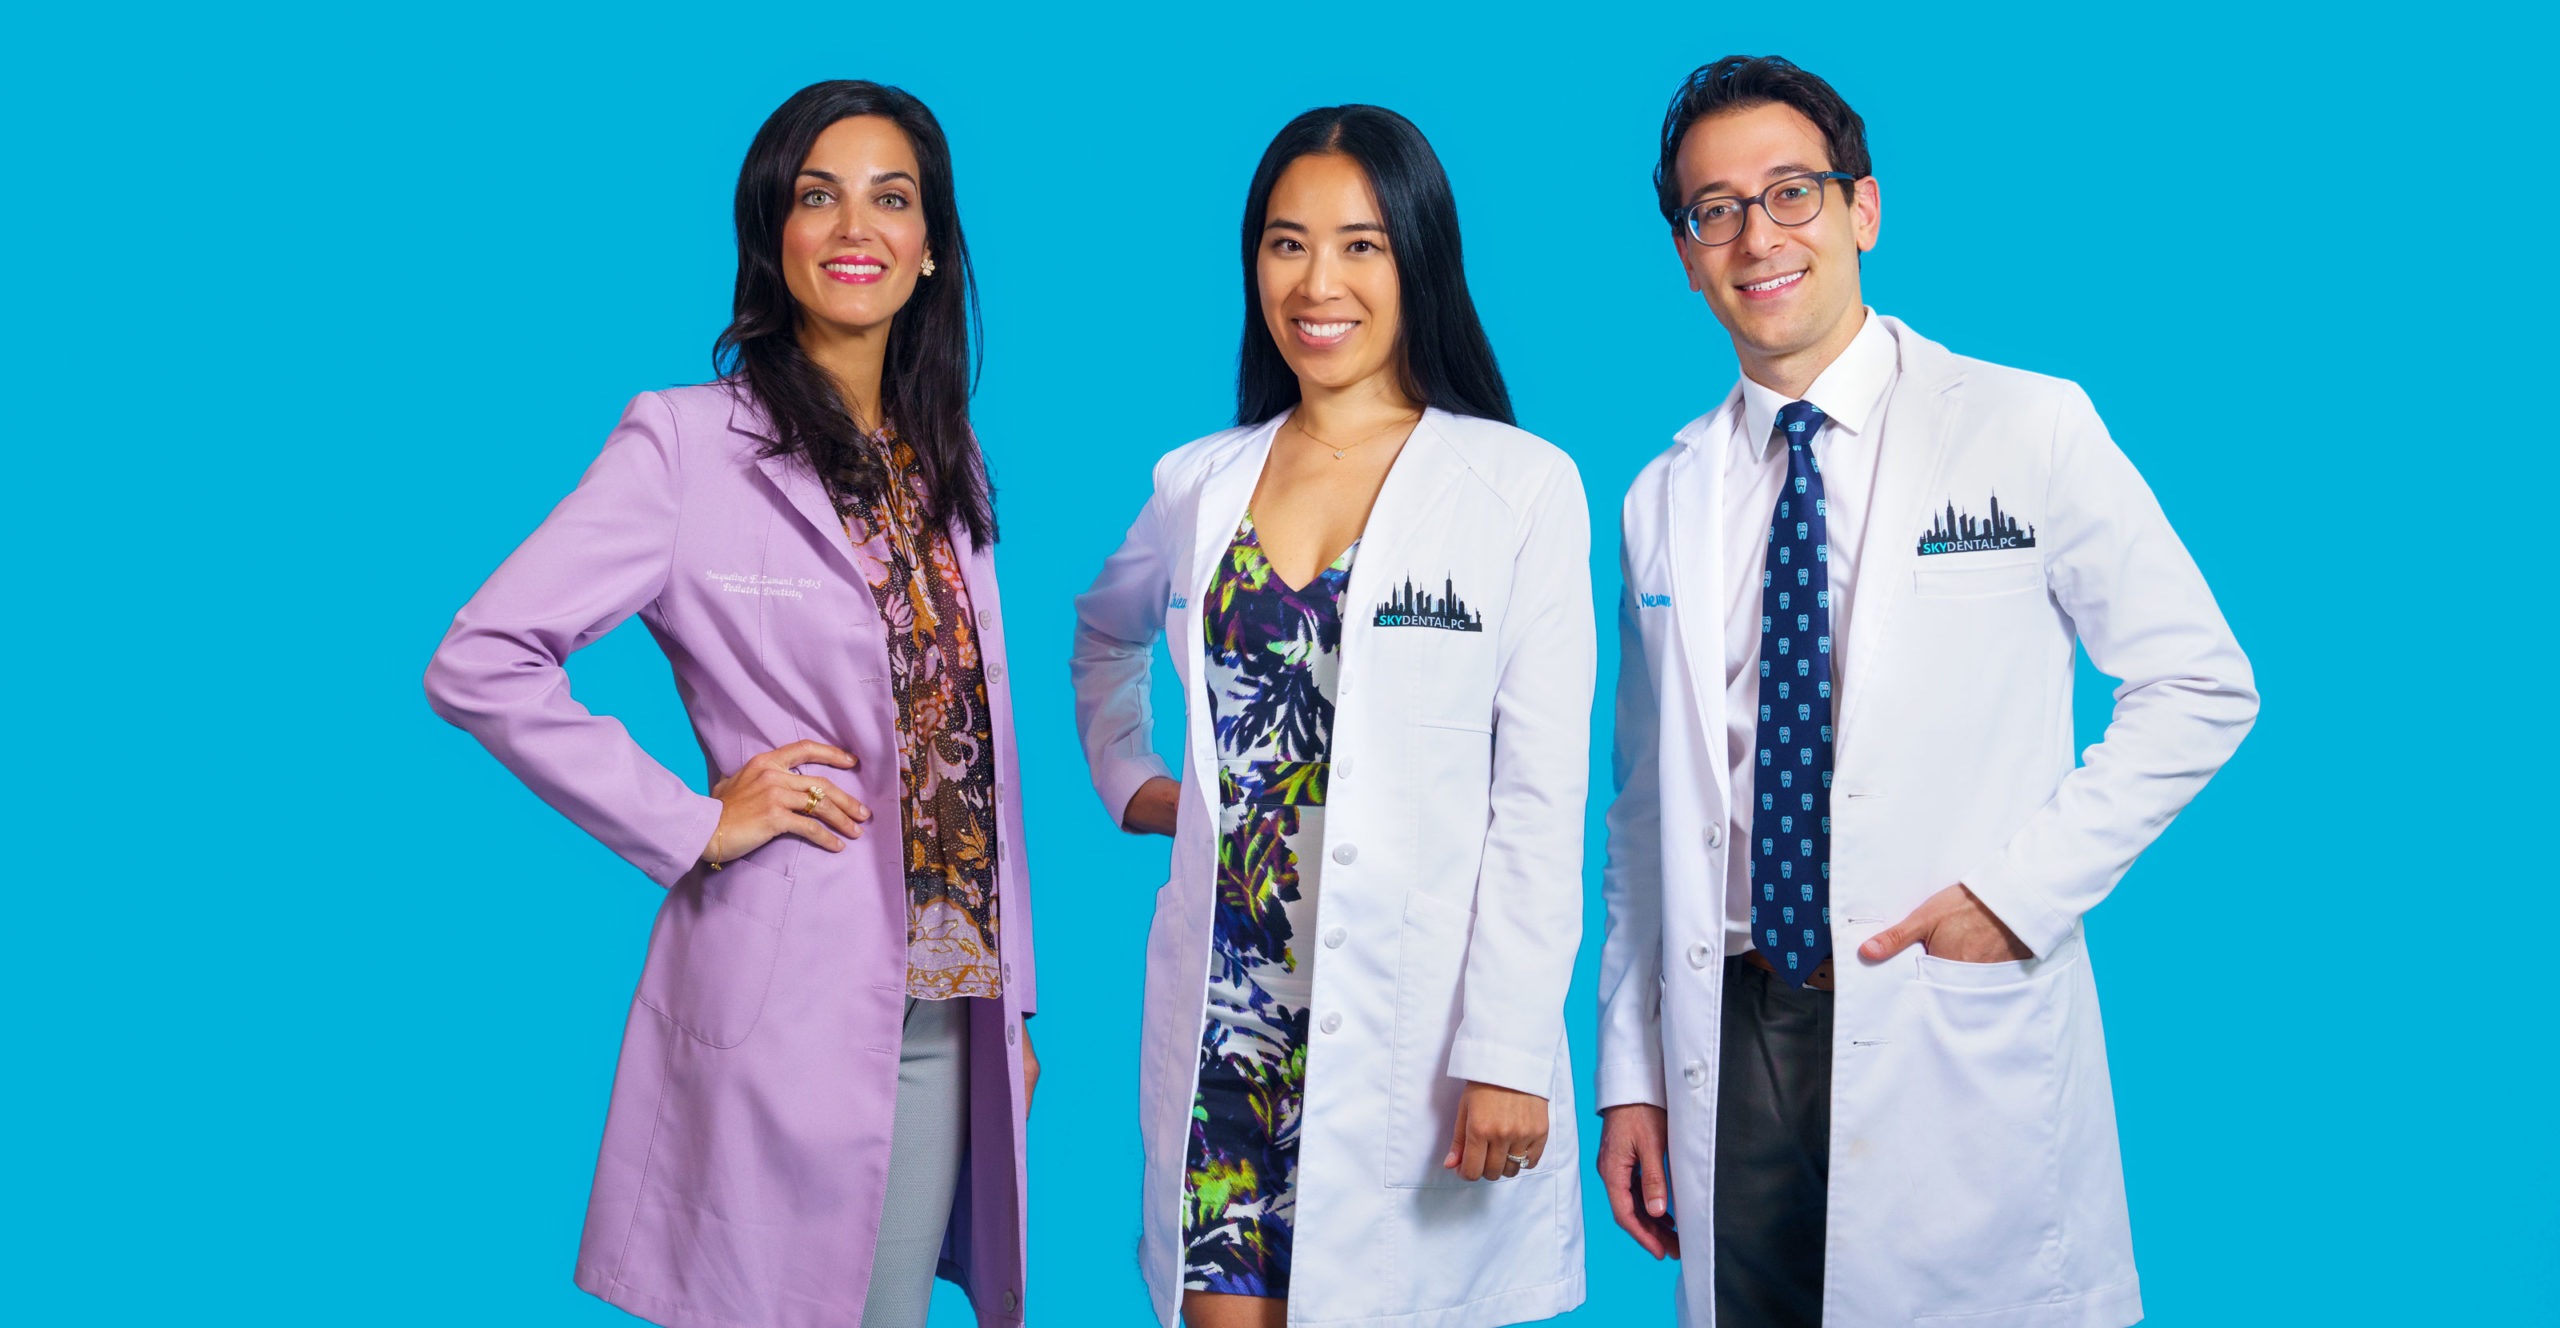 Sky Dental Dentists against a sky-blue background. Left to right: Dr. Jacqueline Zamani, Dr. Wonnie Rhieu, and Dr. Ross Newman. They are here for all your preventive visits!